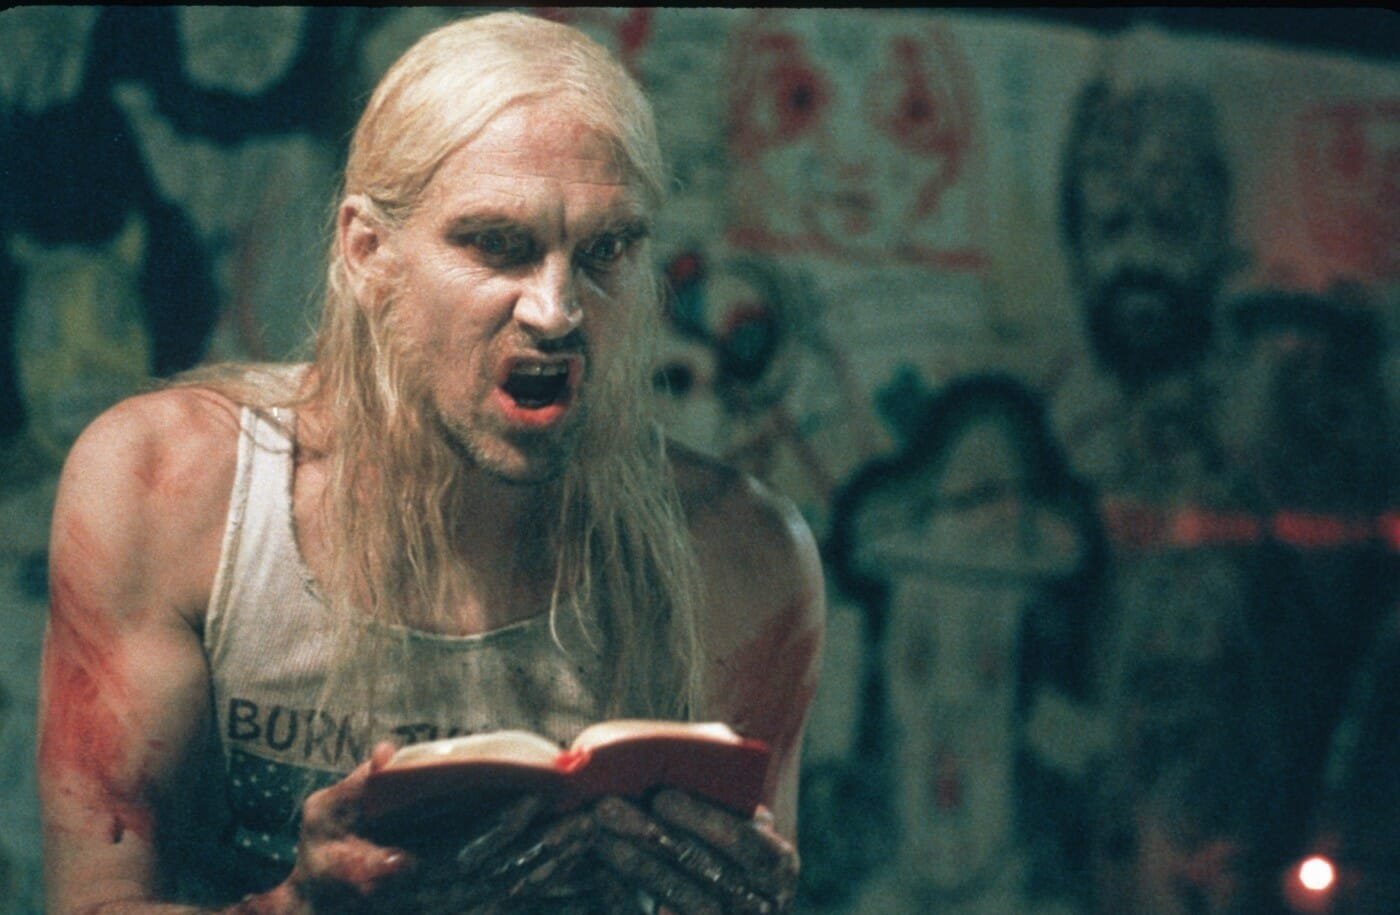 14. House of 1000 Corpses (2003)